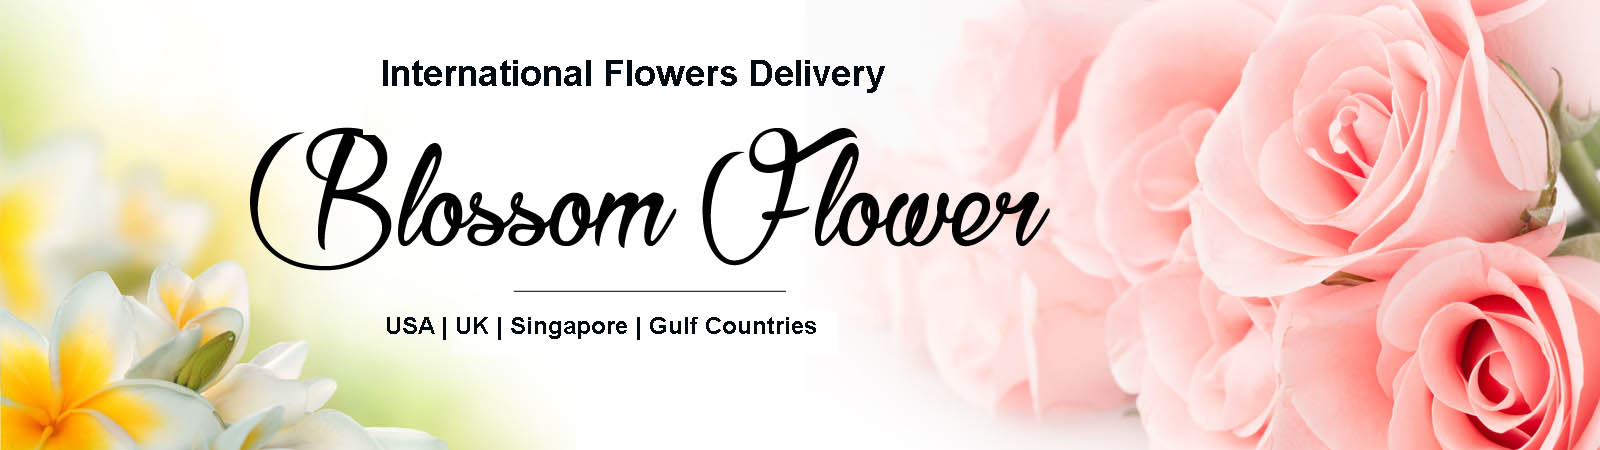 International online flowers delivery- send flowers to USA, UK International abroad by India florist